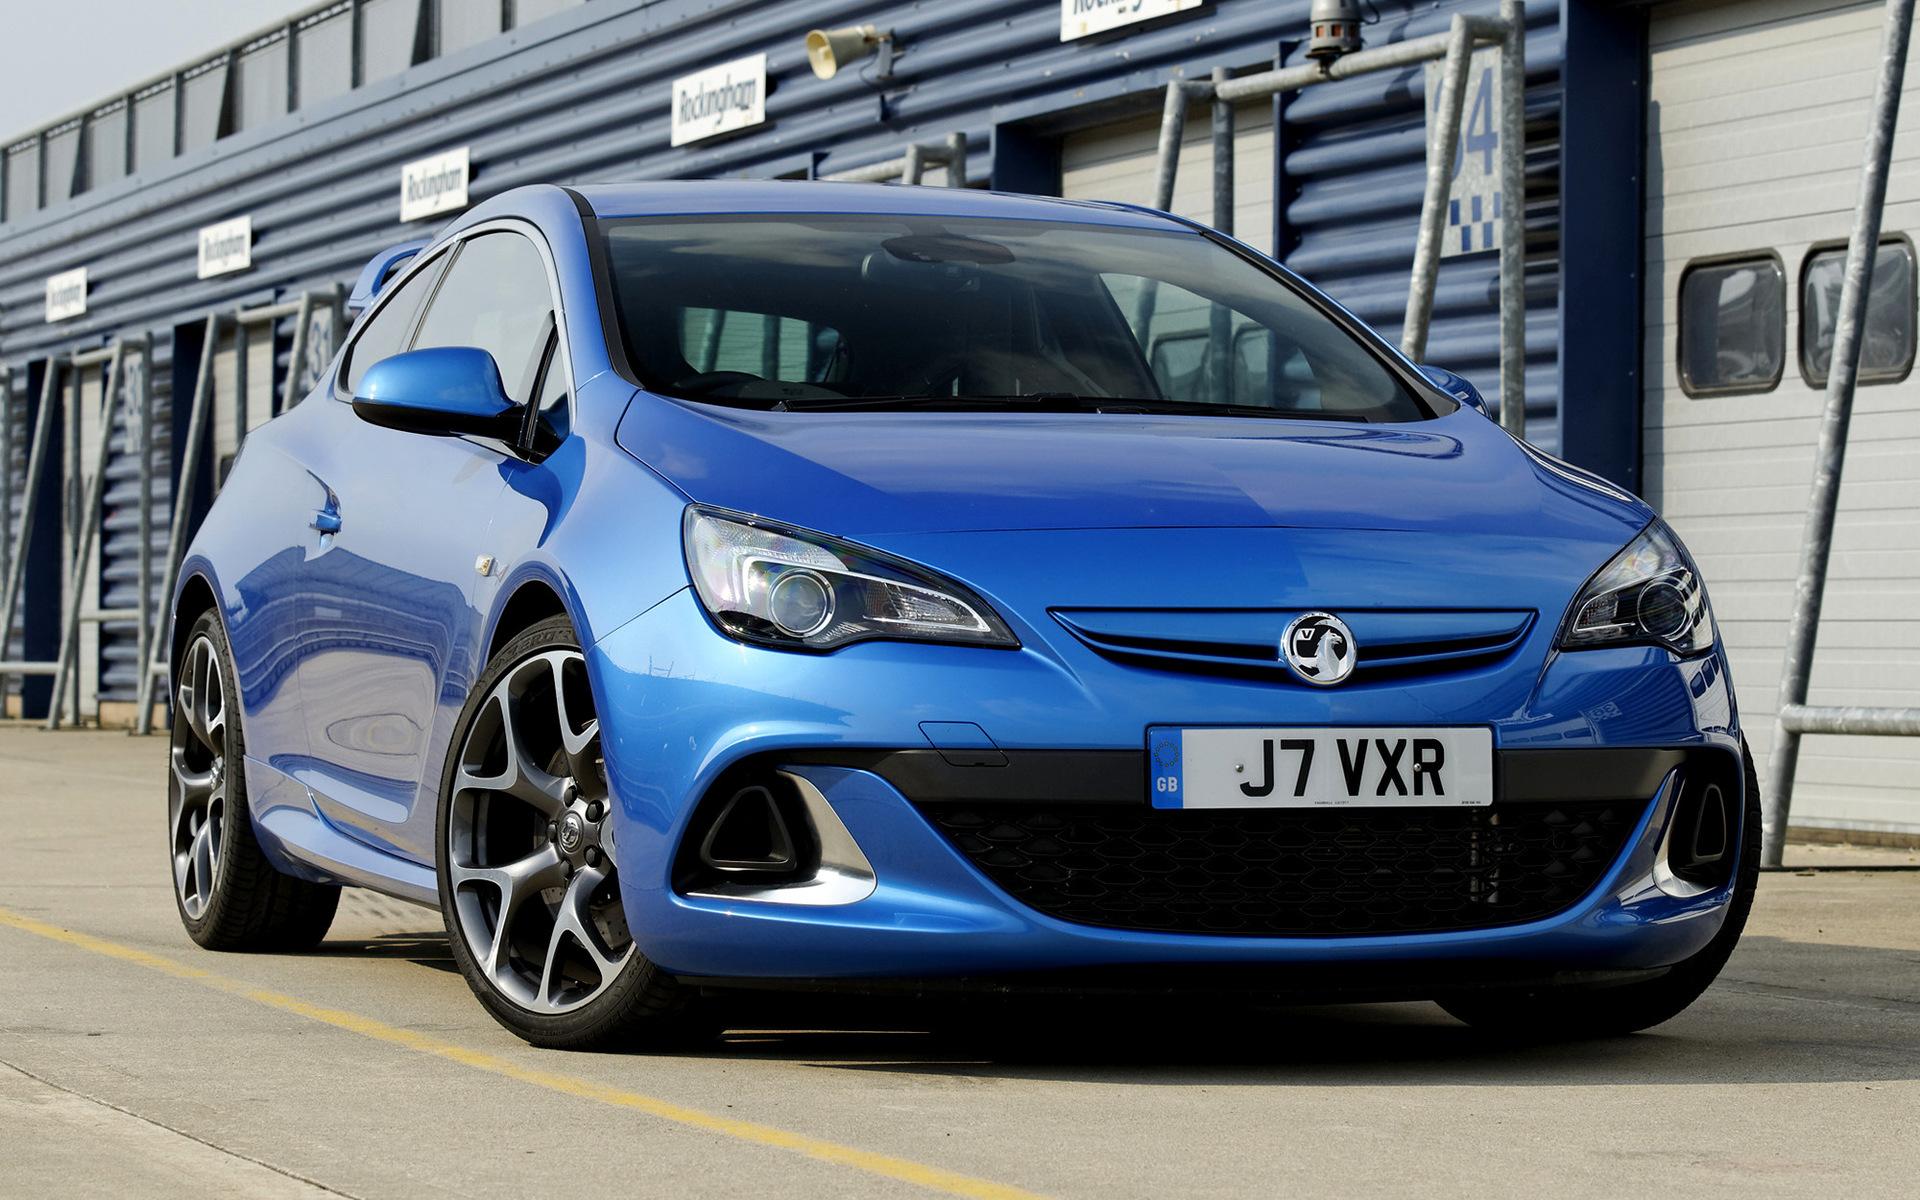 Vauxhall Astra VXR and HD Image